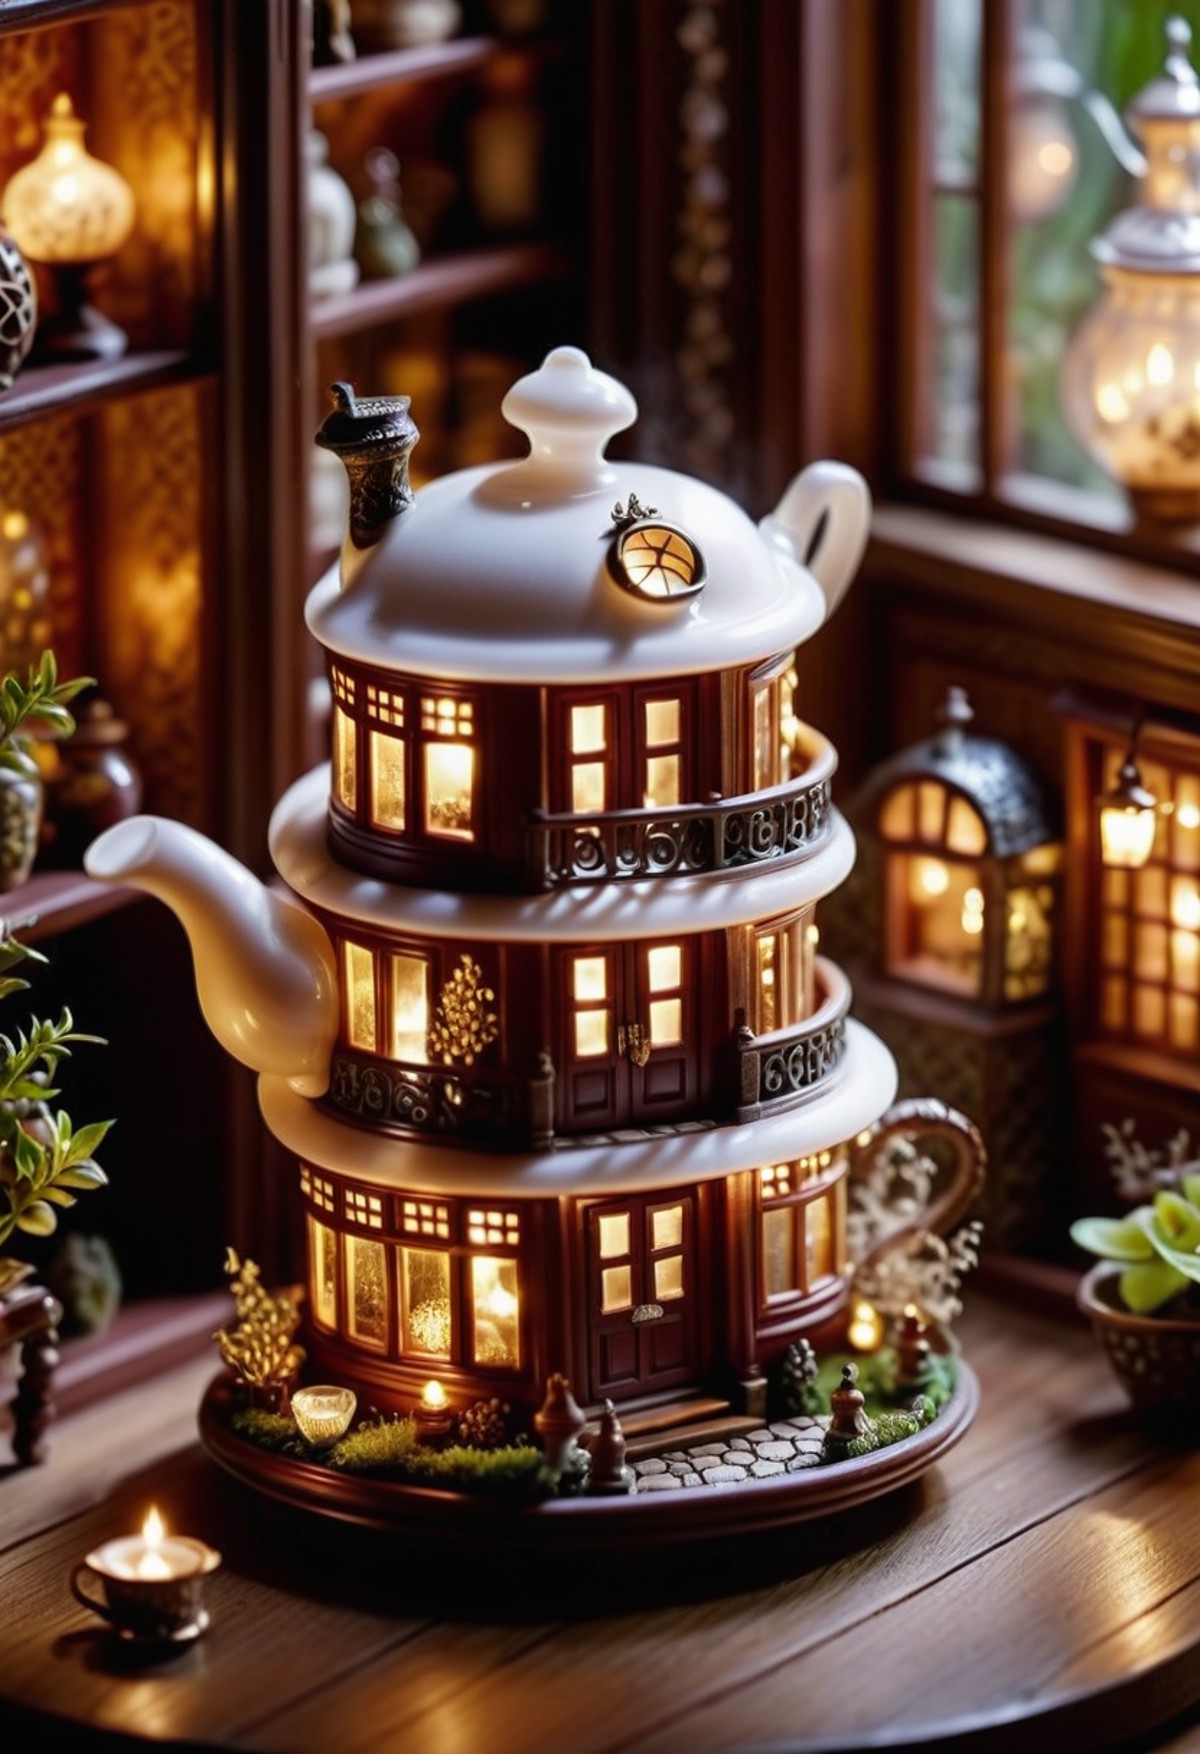 cinematic photo In a cozy teapot house, a miniature model of a miniature house inside is adorned with intricate details. I...